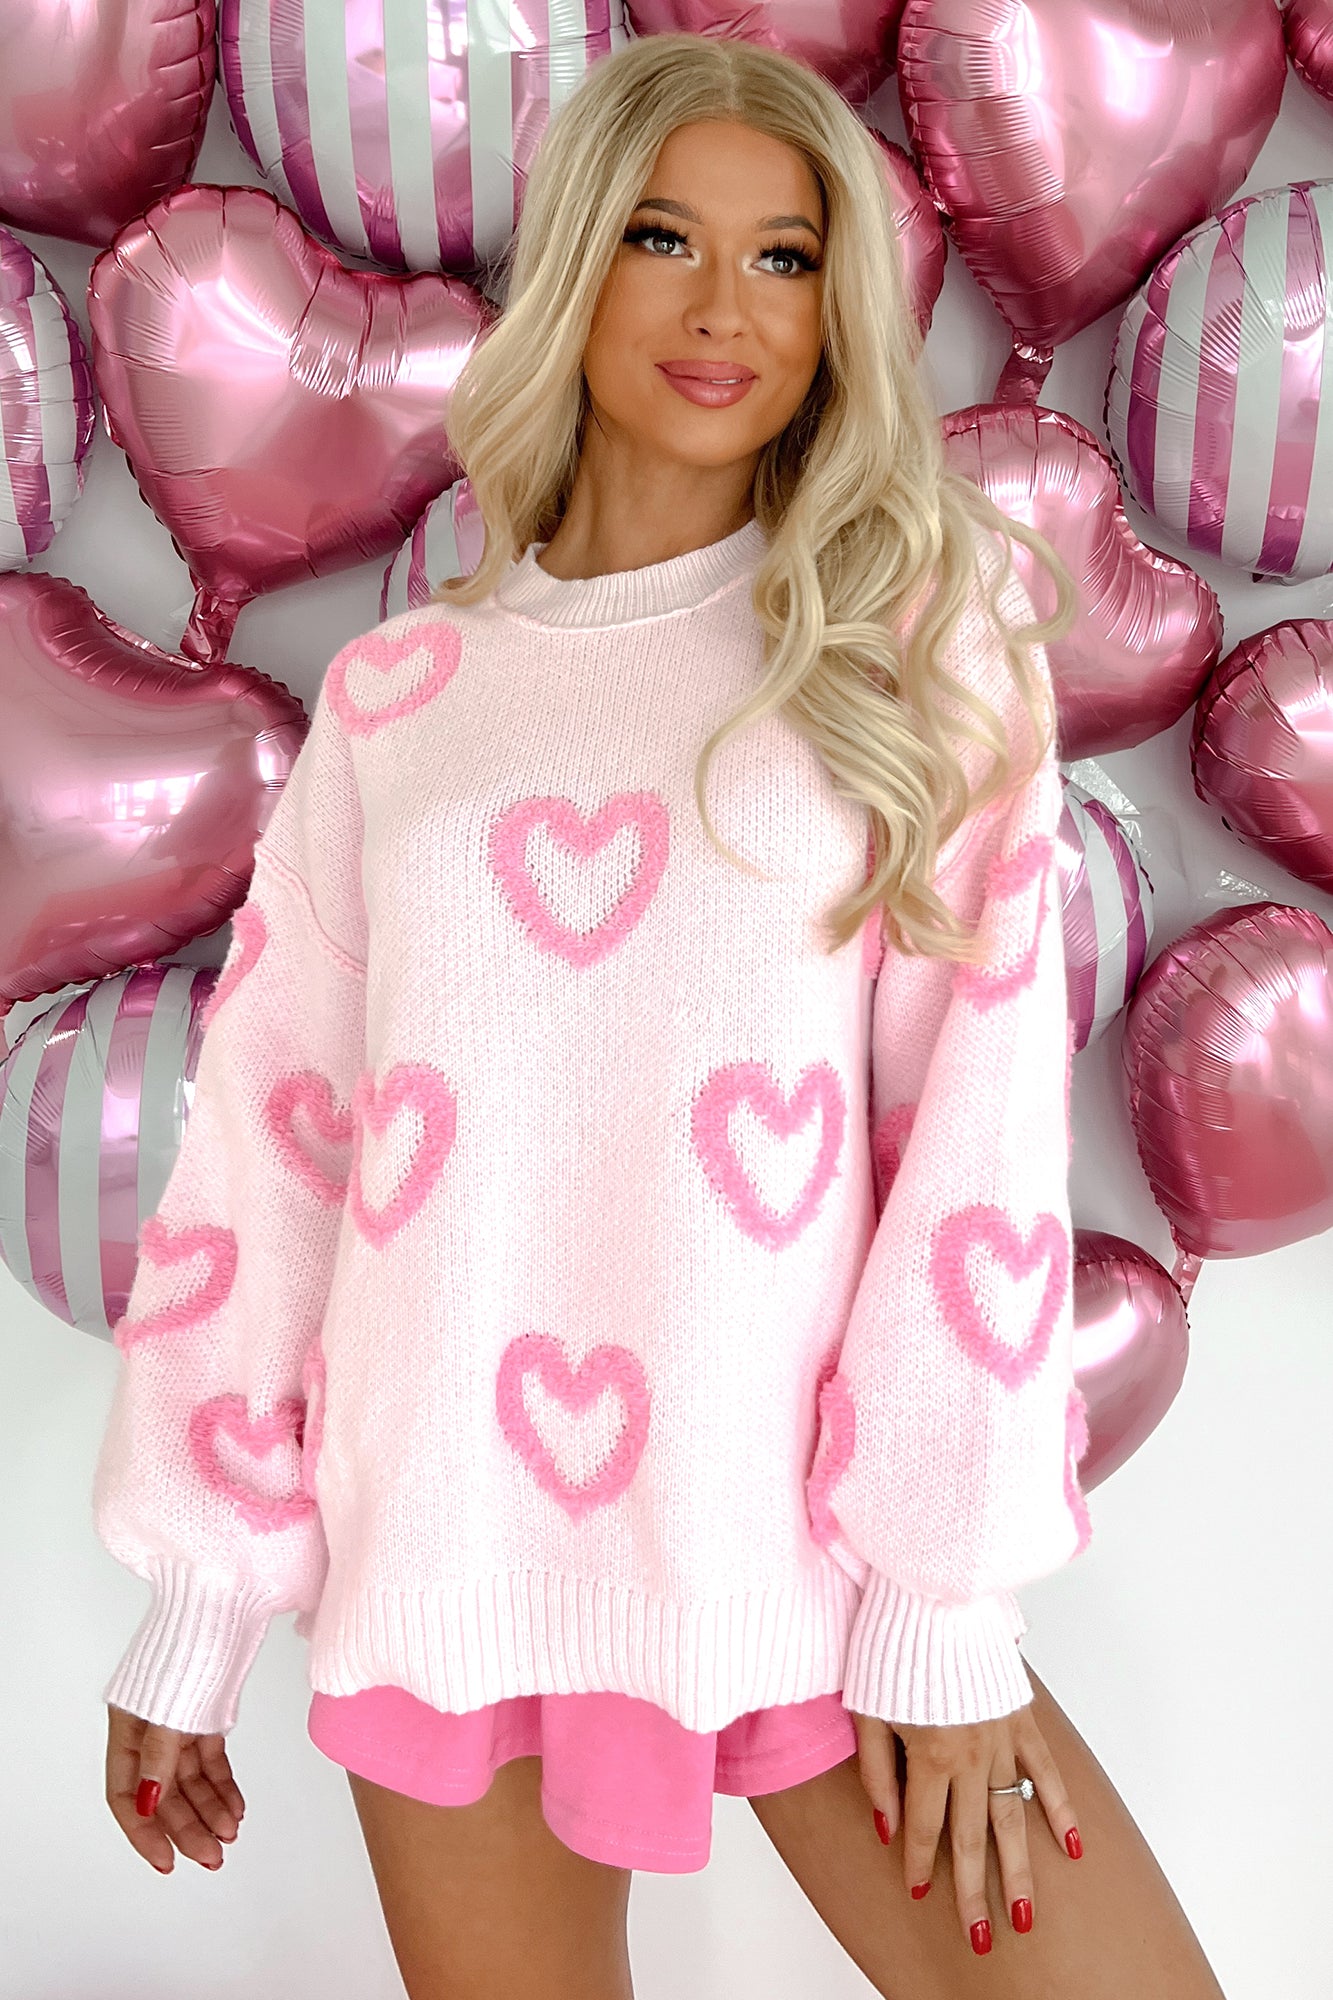 Straight From The Heart Textured Heart Sweater (Pink)